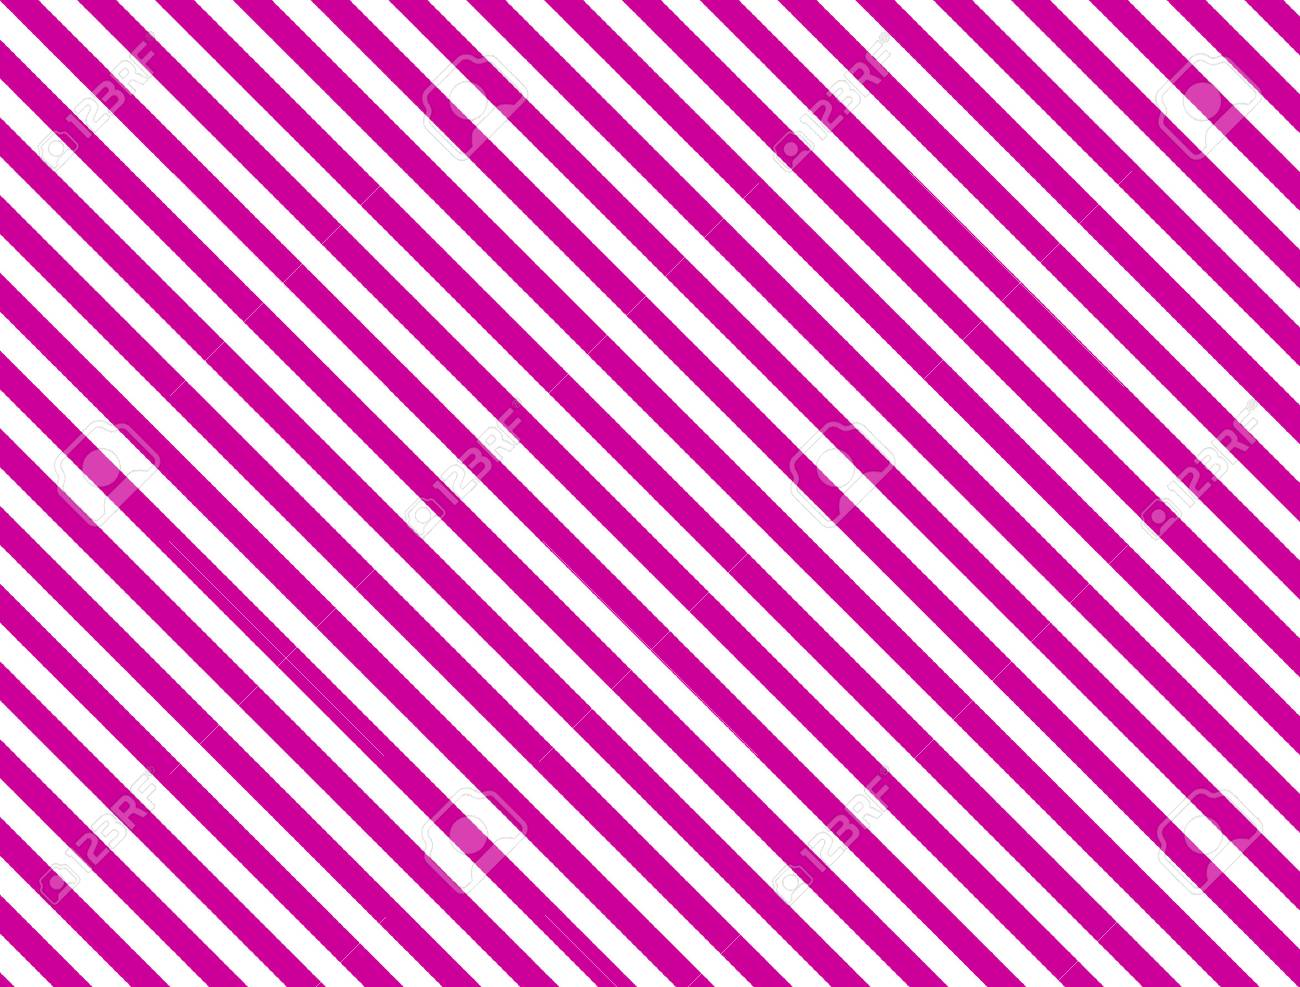 Seamless Continuous Diagonal Striped Background In Pink And